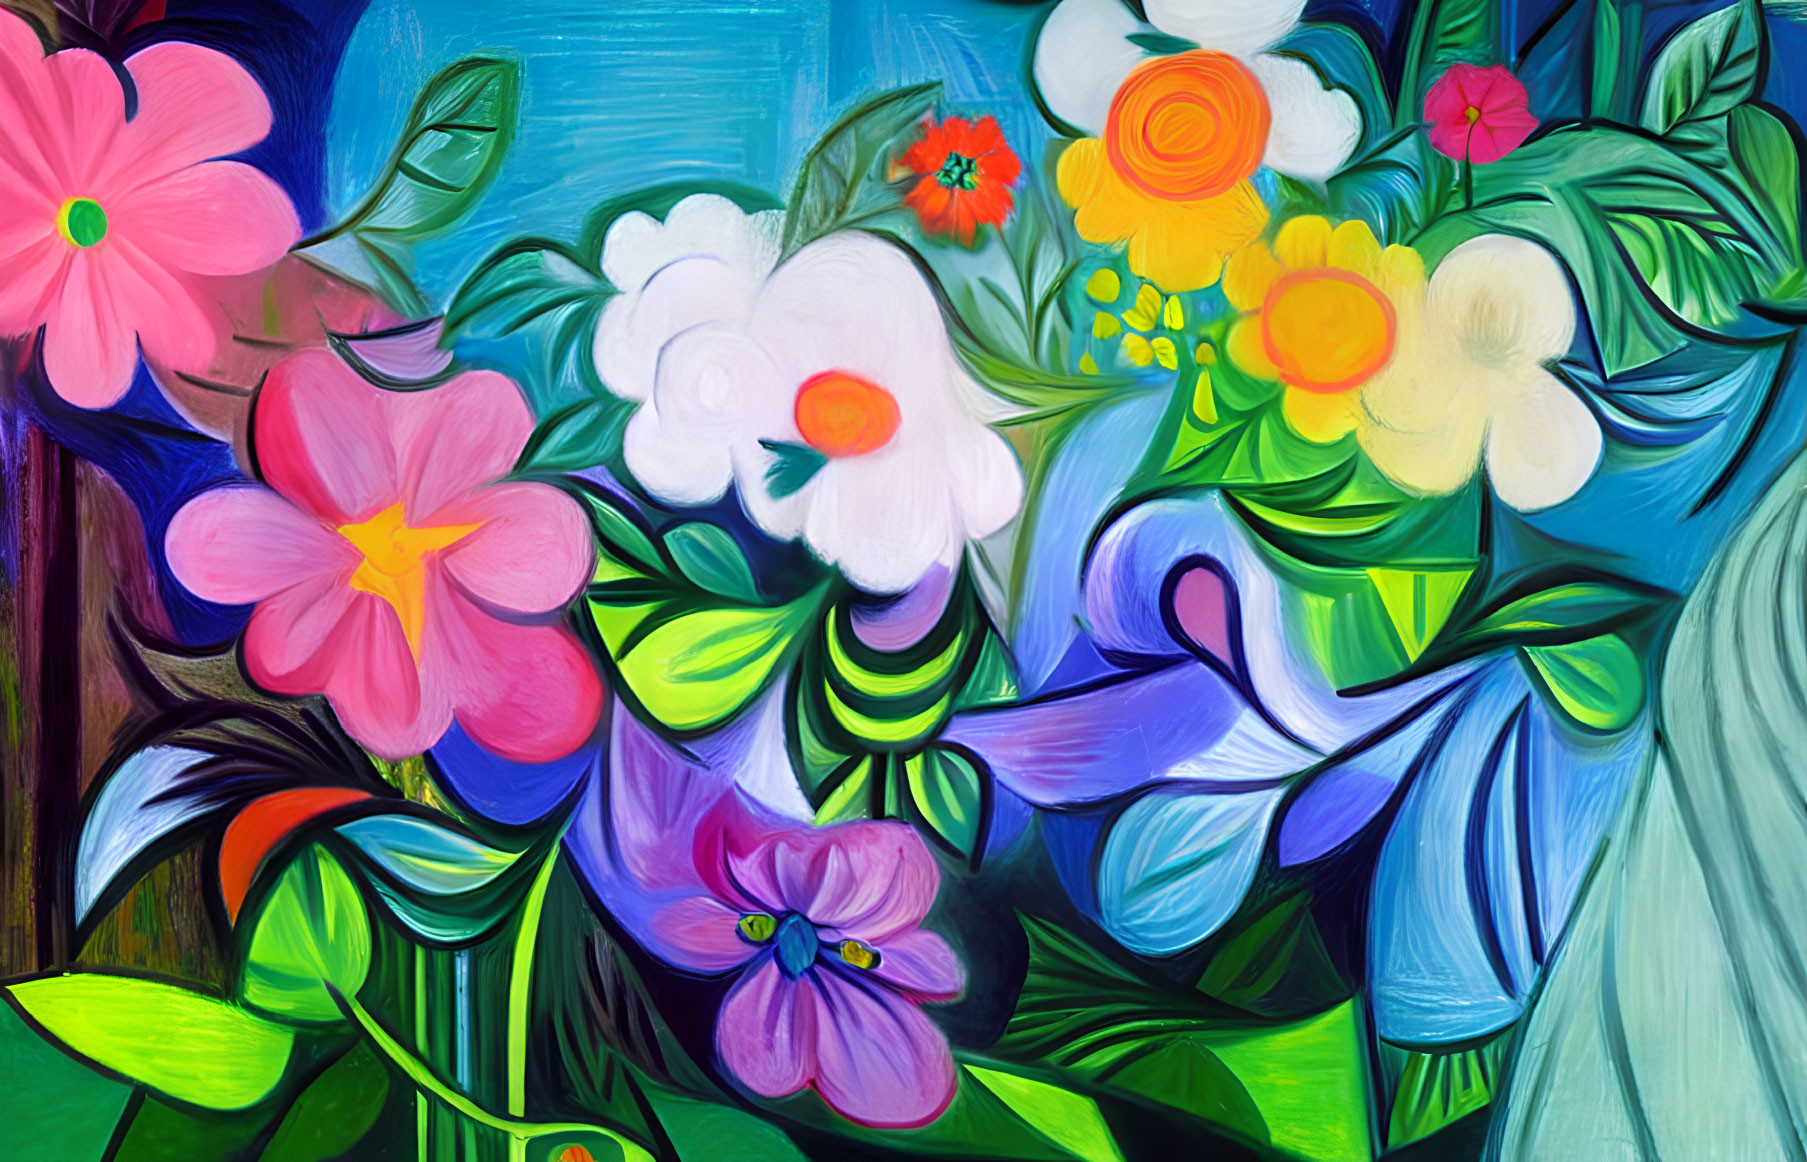 Vibrant Flower Painting in Pink, White, Red, Yellow, Green, and Blue